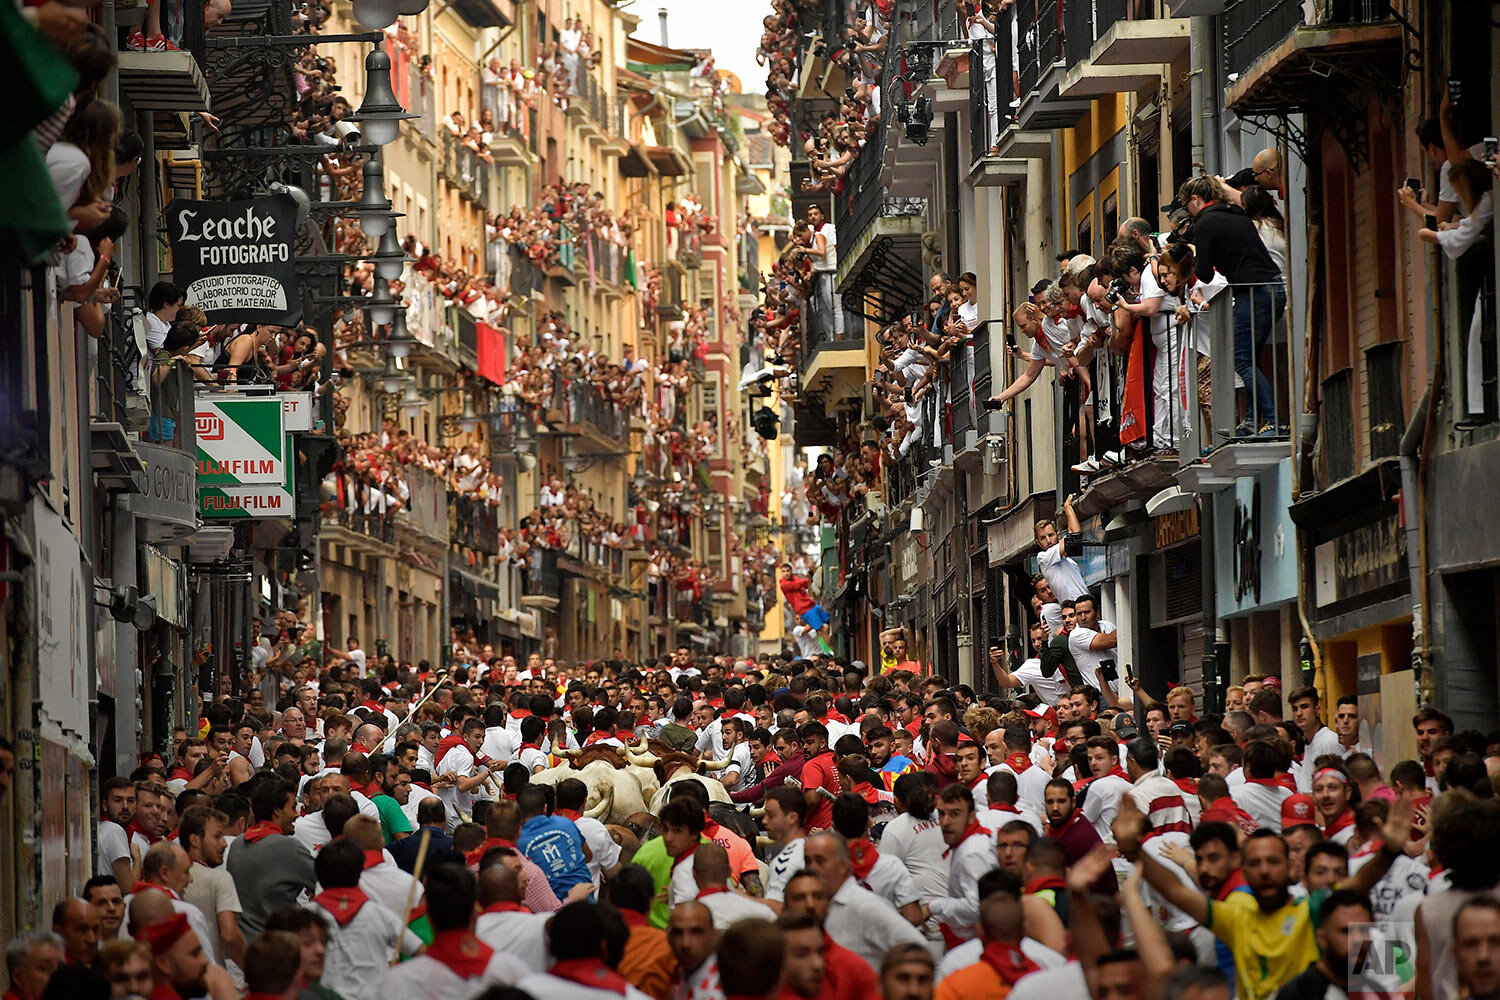  Revellers run next to fighting bulls from Cebada Gago ranch during the running of the bulls at the San Fermin Festival in Pamplona, Spain, on July 8, 2019. (AP Photo/Alvaro Barrientos) 